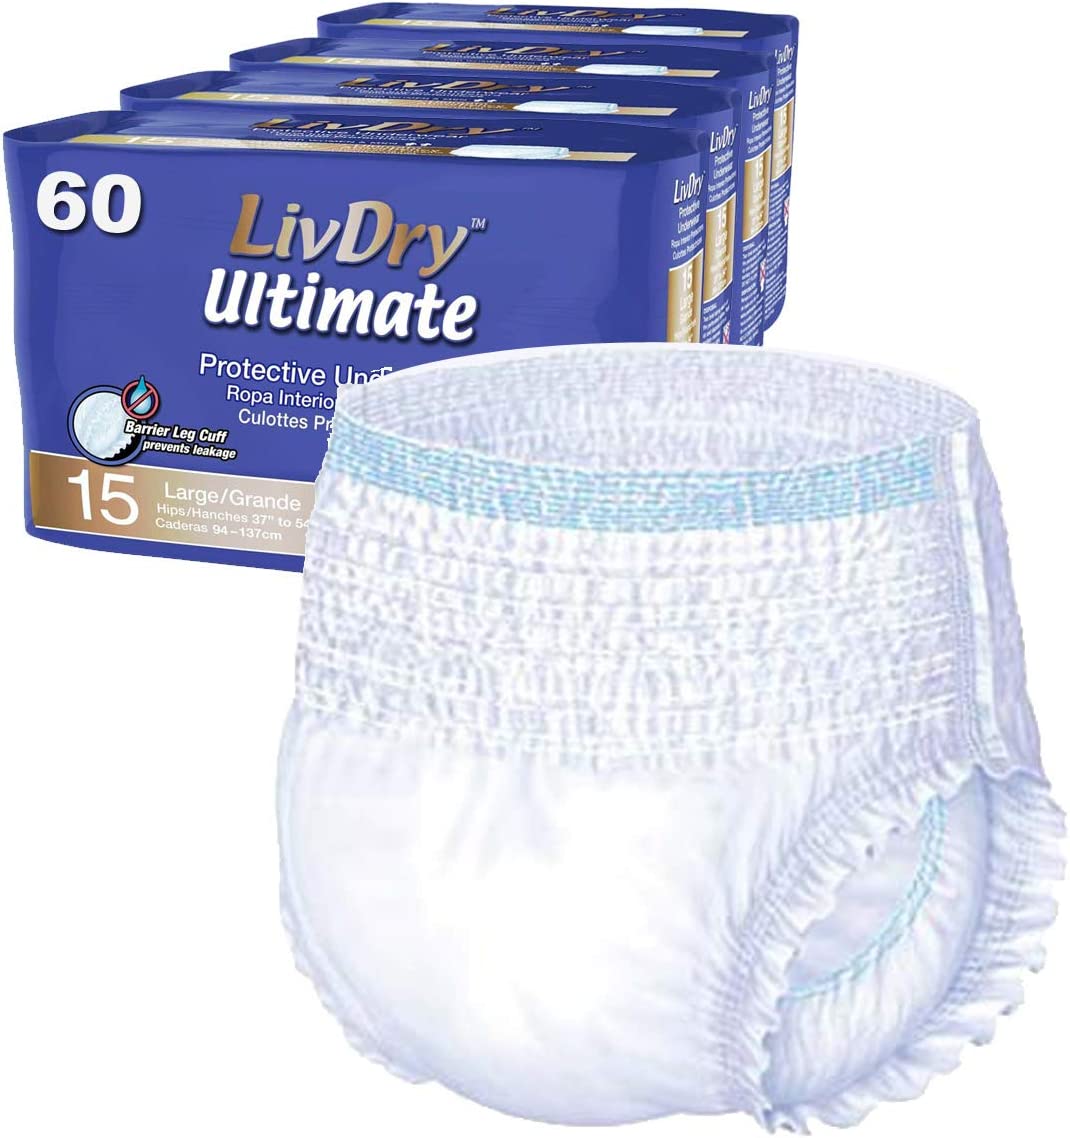 LivDry Ultimate Adult Incontinence Underwear, High Absorbency, Leak Cuff Protection, Large, 60-Pack